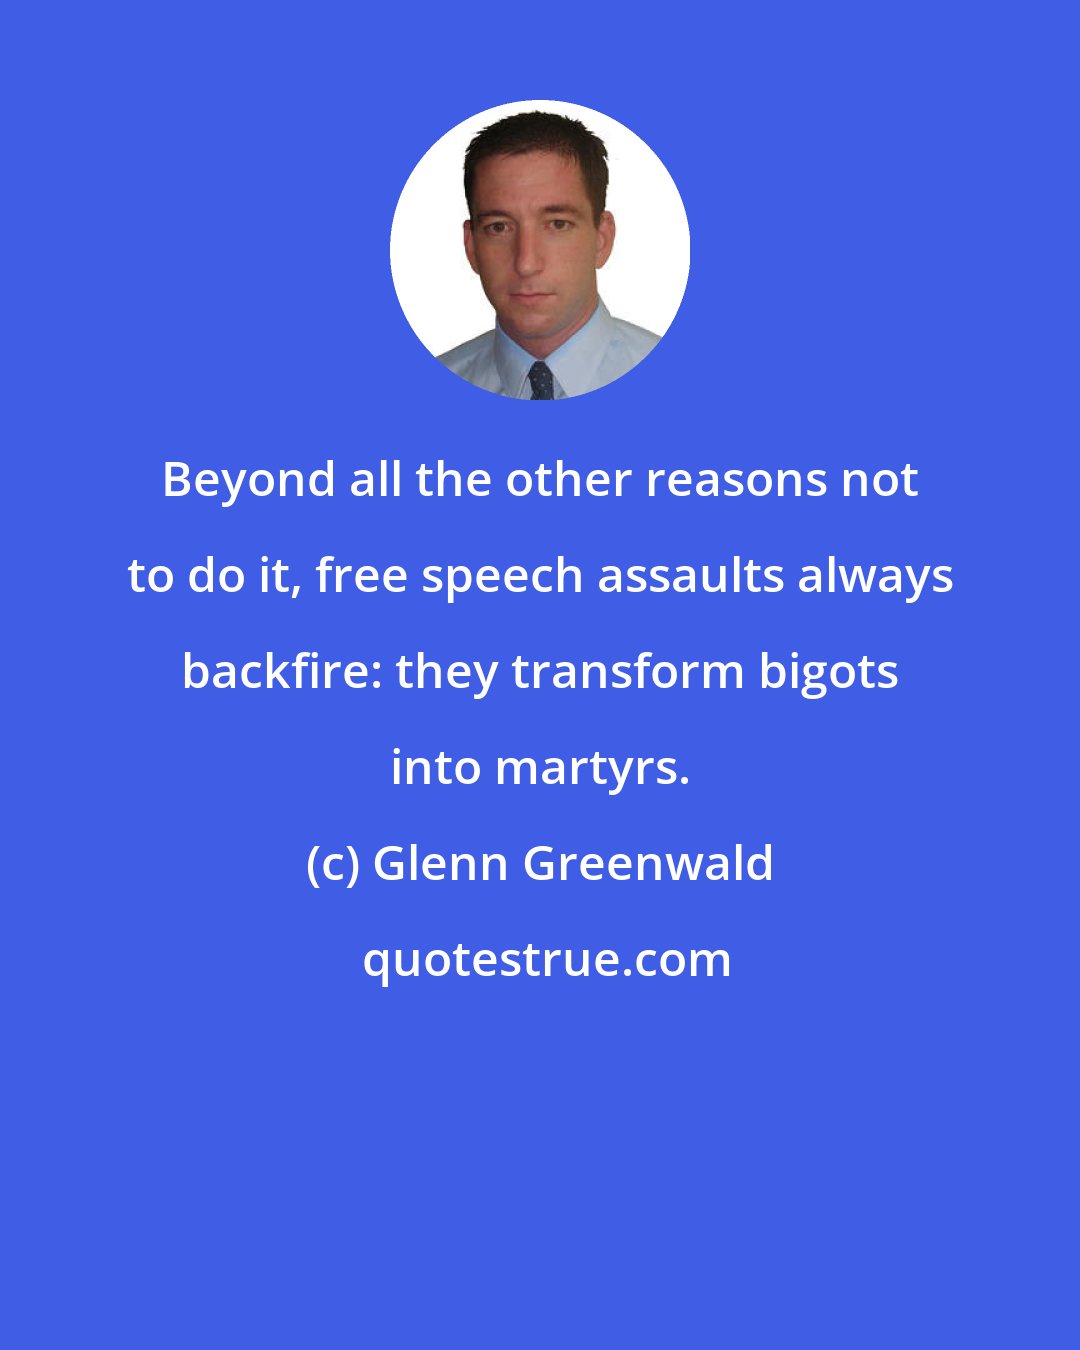 Glenn Greenwald: Beyond all the other reasons not to do it, free speech assaults always backfire: they transform bigots into martyrs.